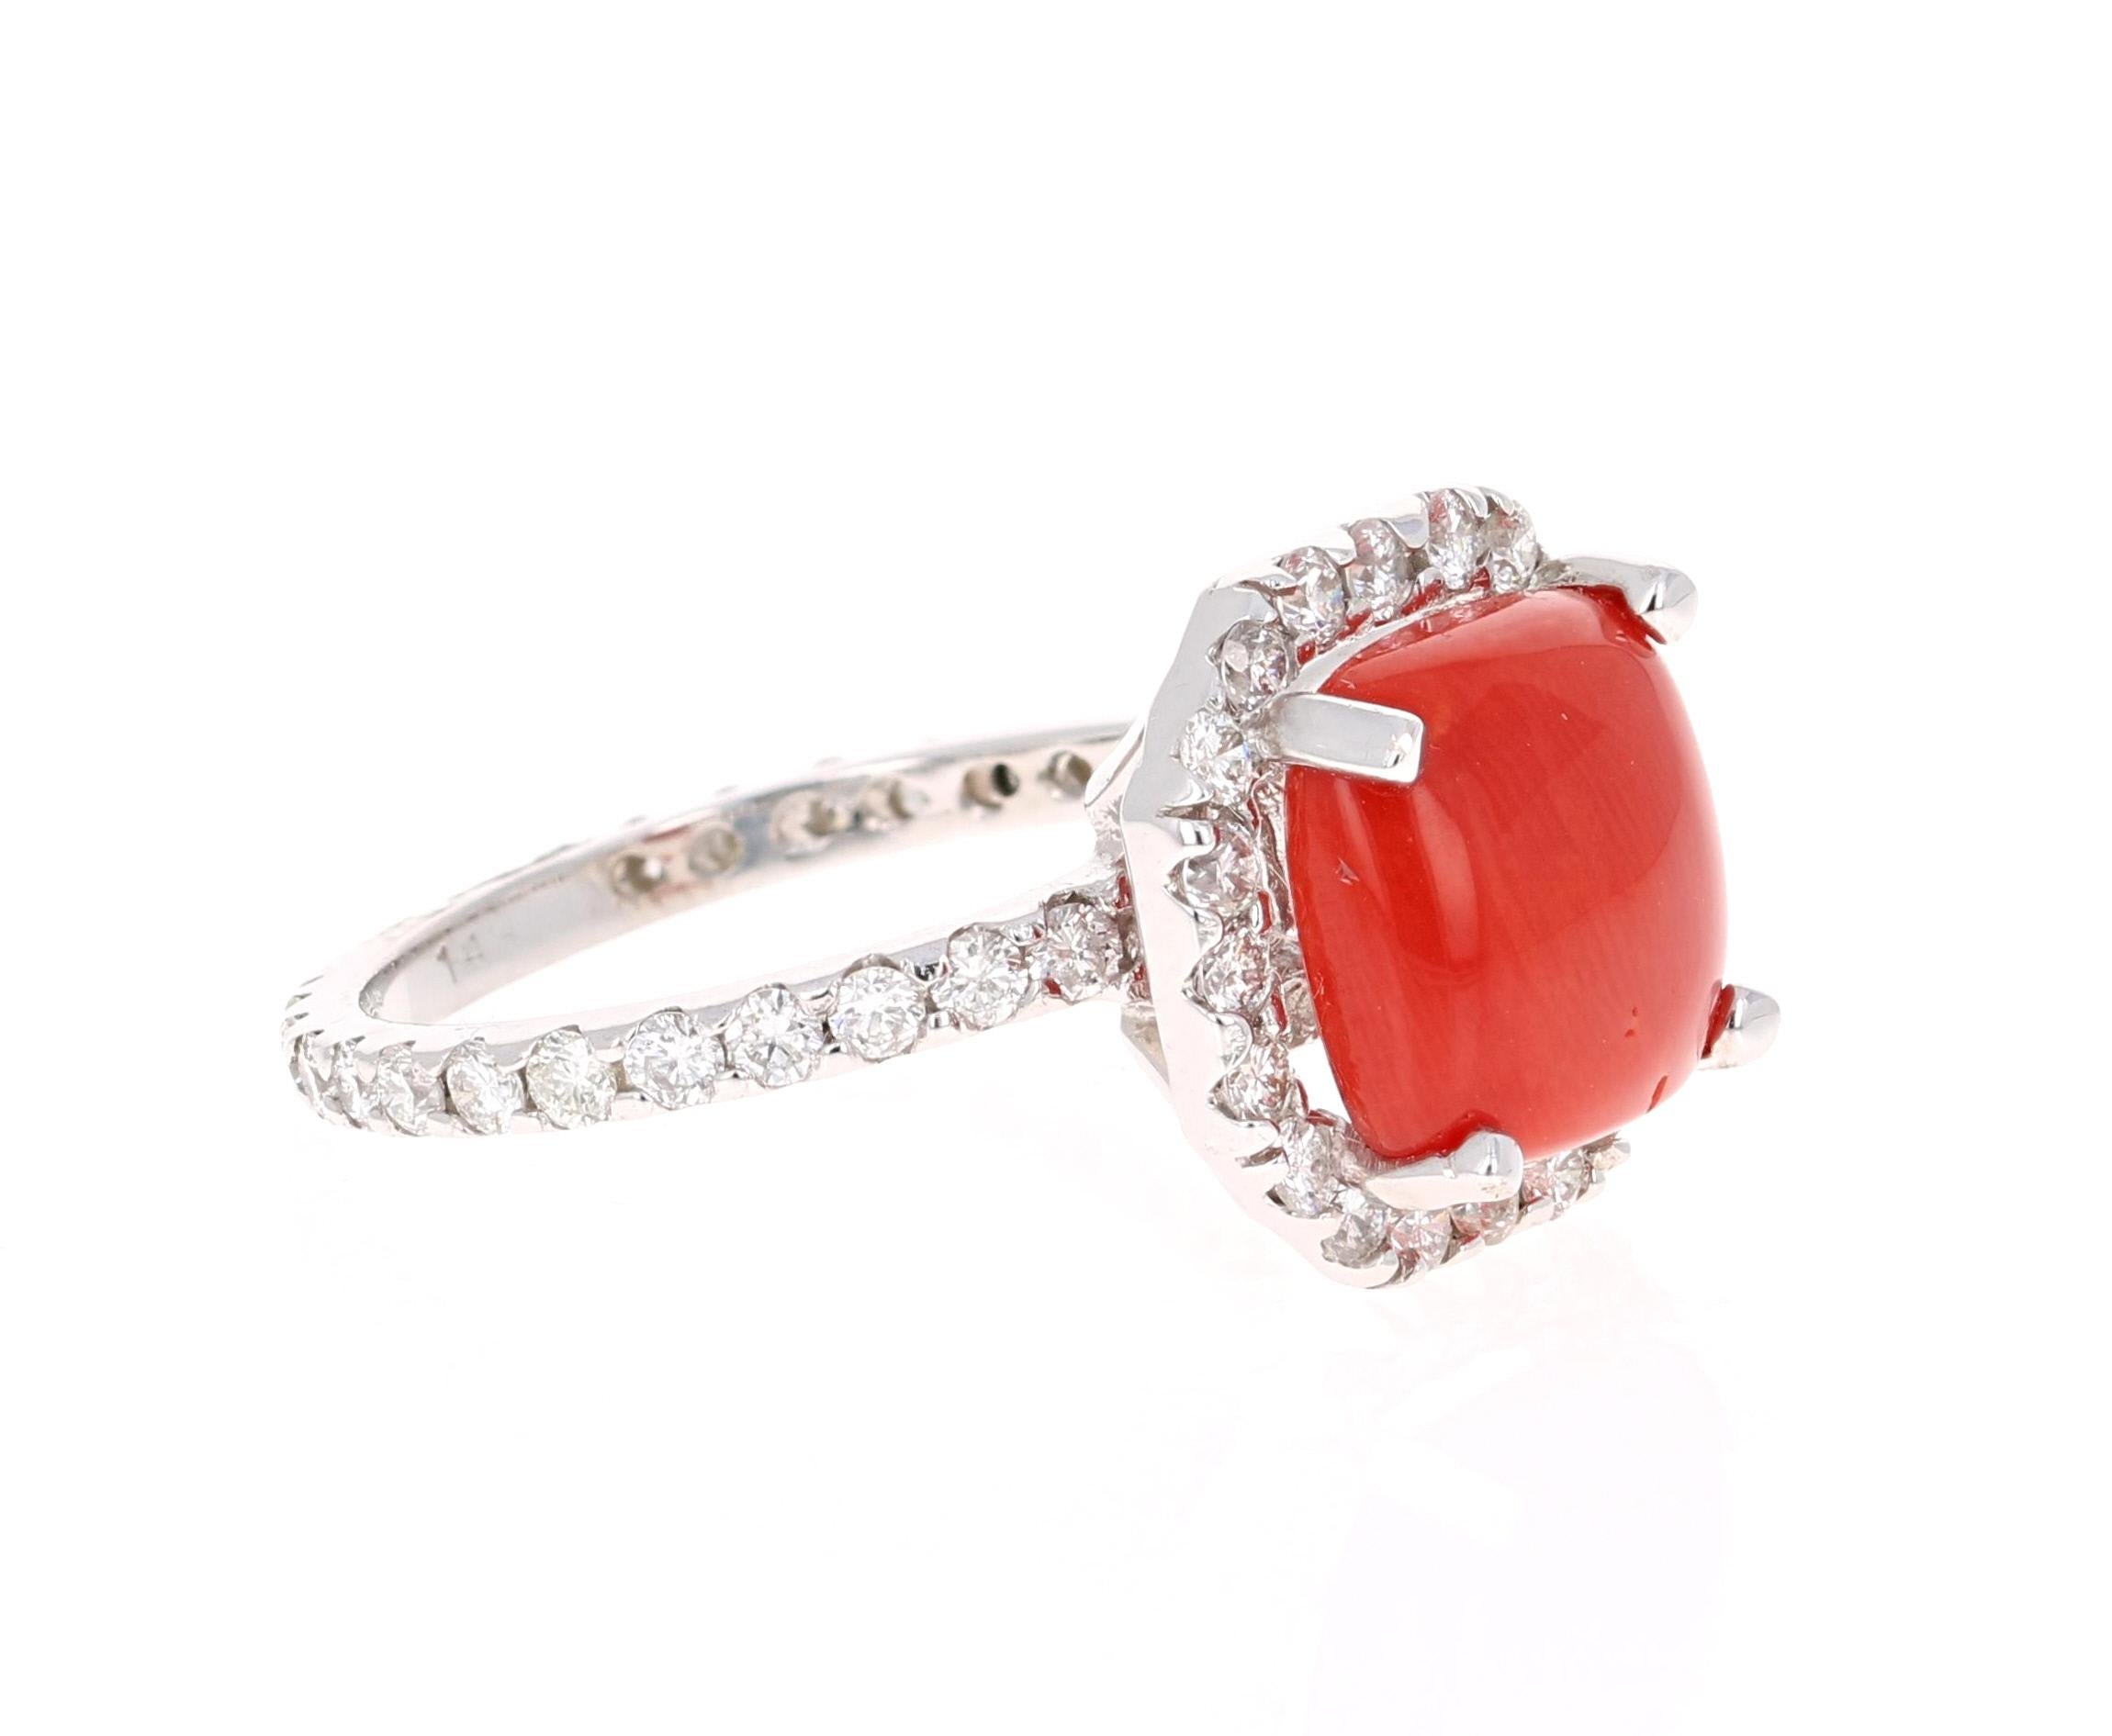 If you want the most unique Engagement Ring on the planet, this one is for you! A beautiful Red-Orange Coral! An organic gem!

This ring has has a Square Cushion Cut 4.08 Carat Coral and is surrounded by 44 Round Cut Diamonds that weigh 1.10 carats.